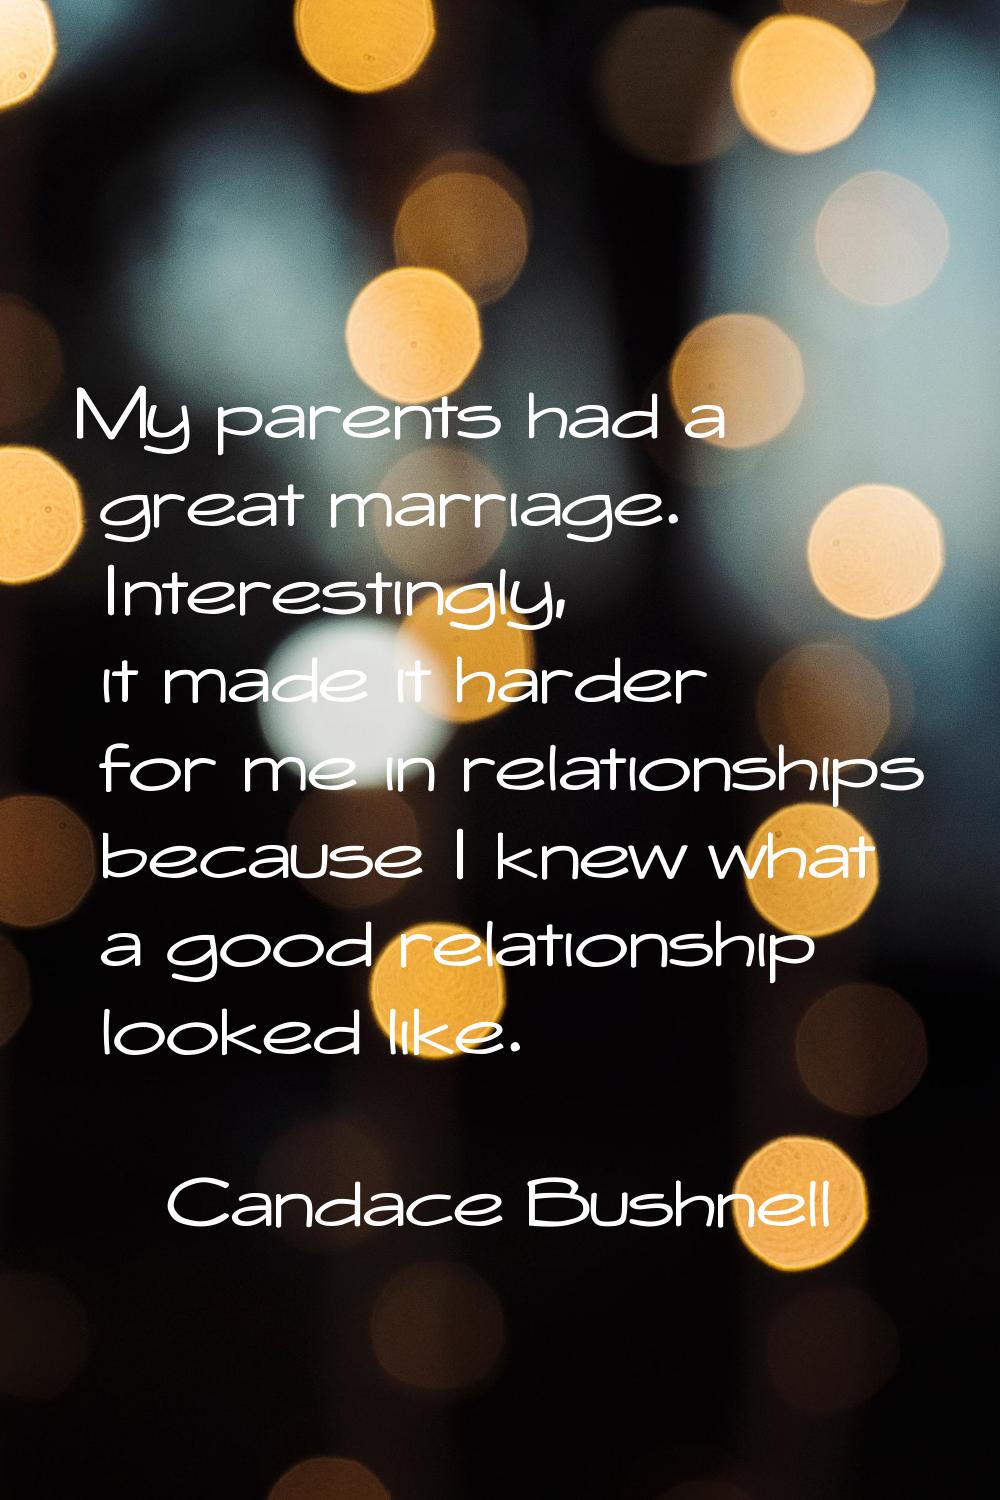 My parents had a great marriage. Interestingly, it made it harder for me in relationships because I